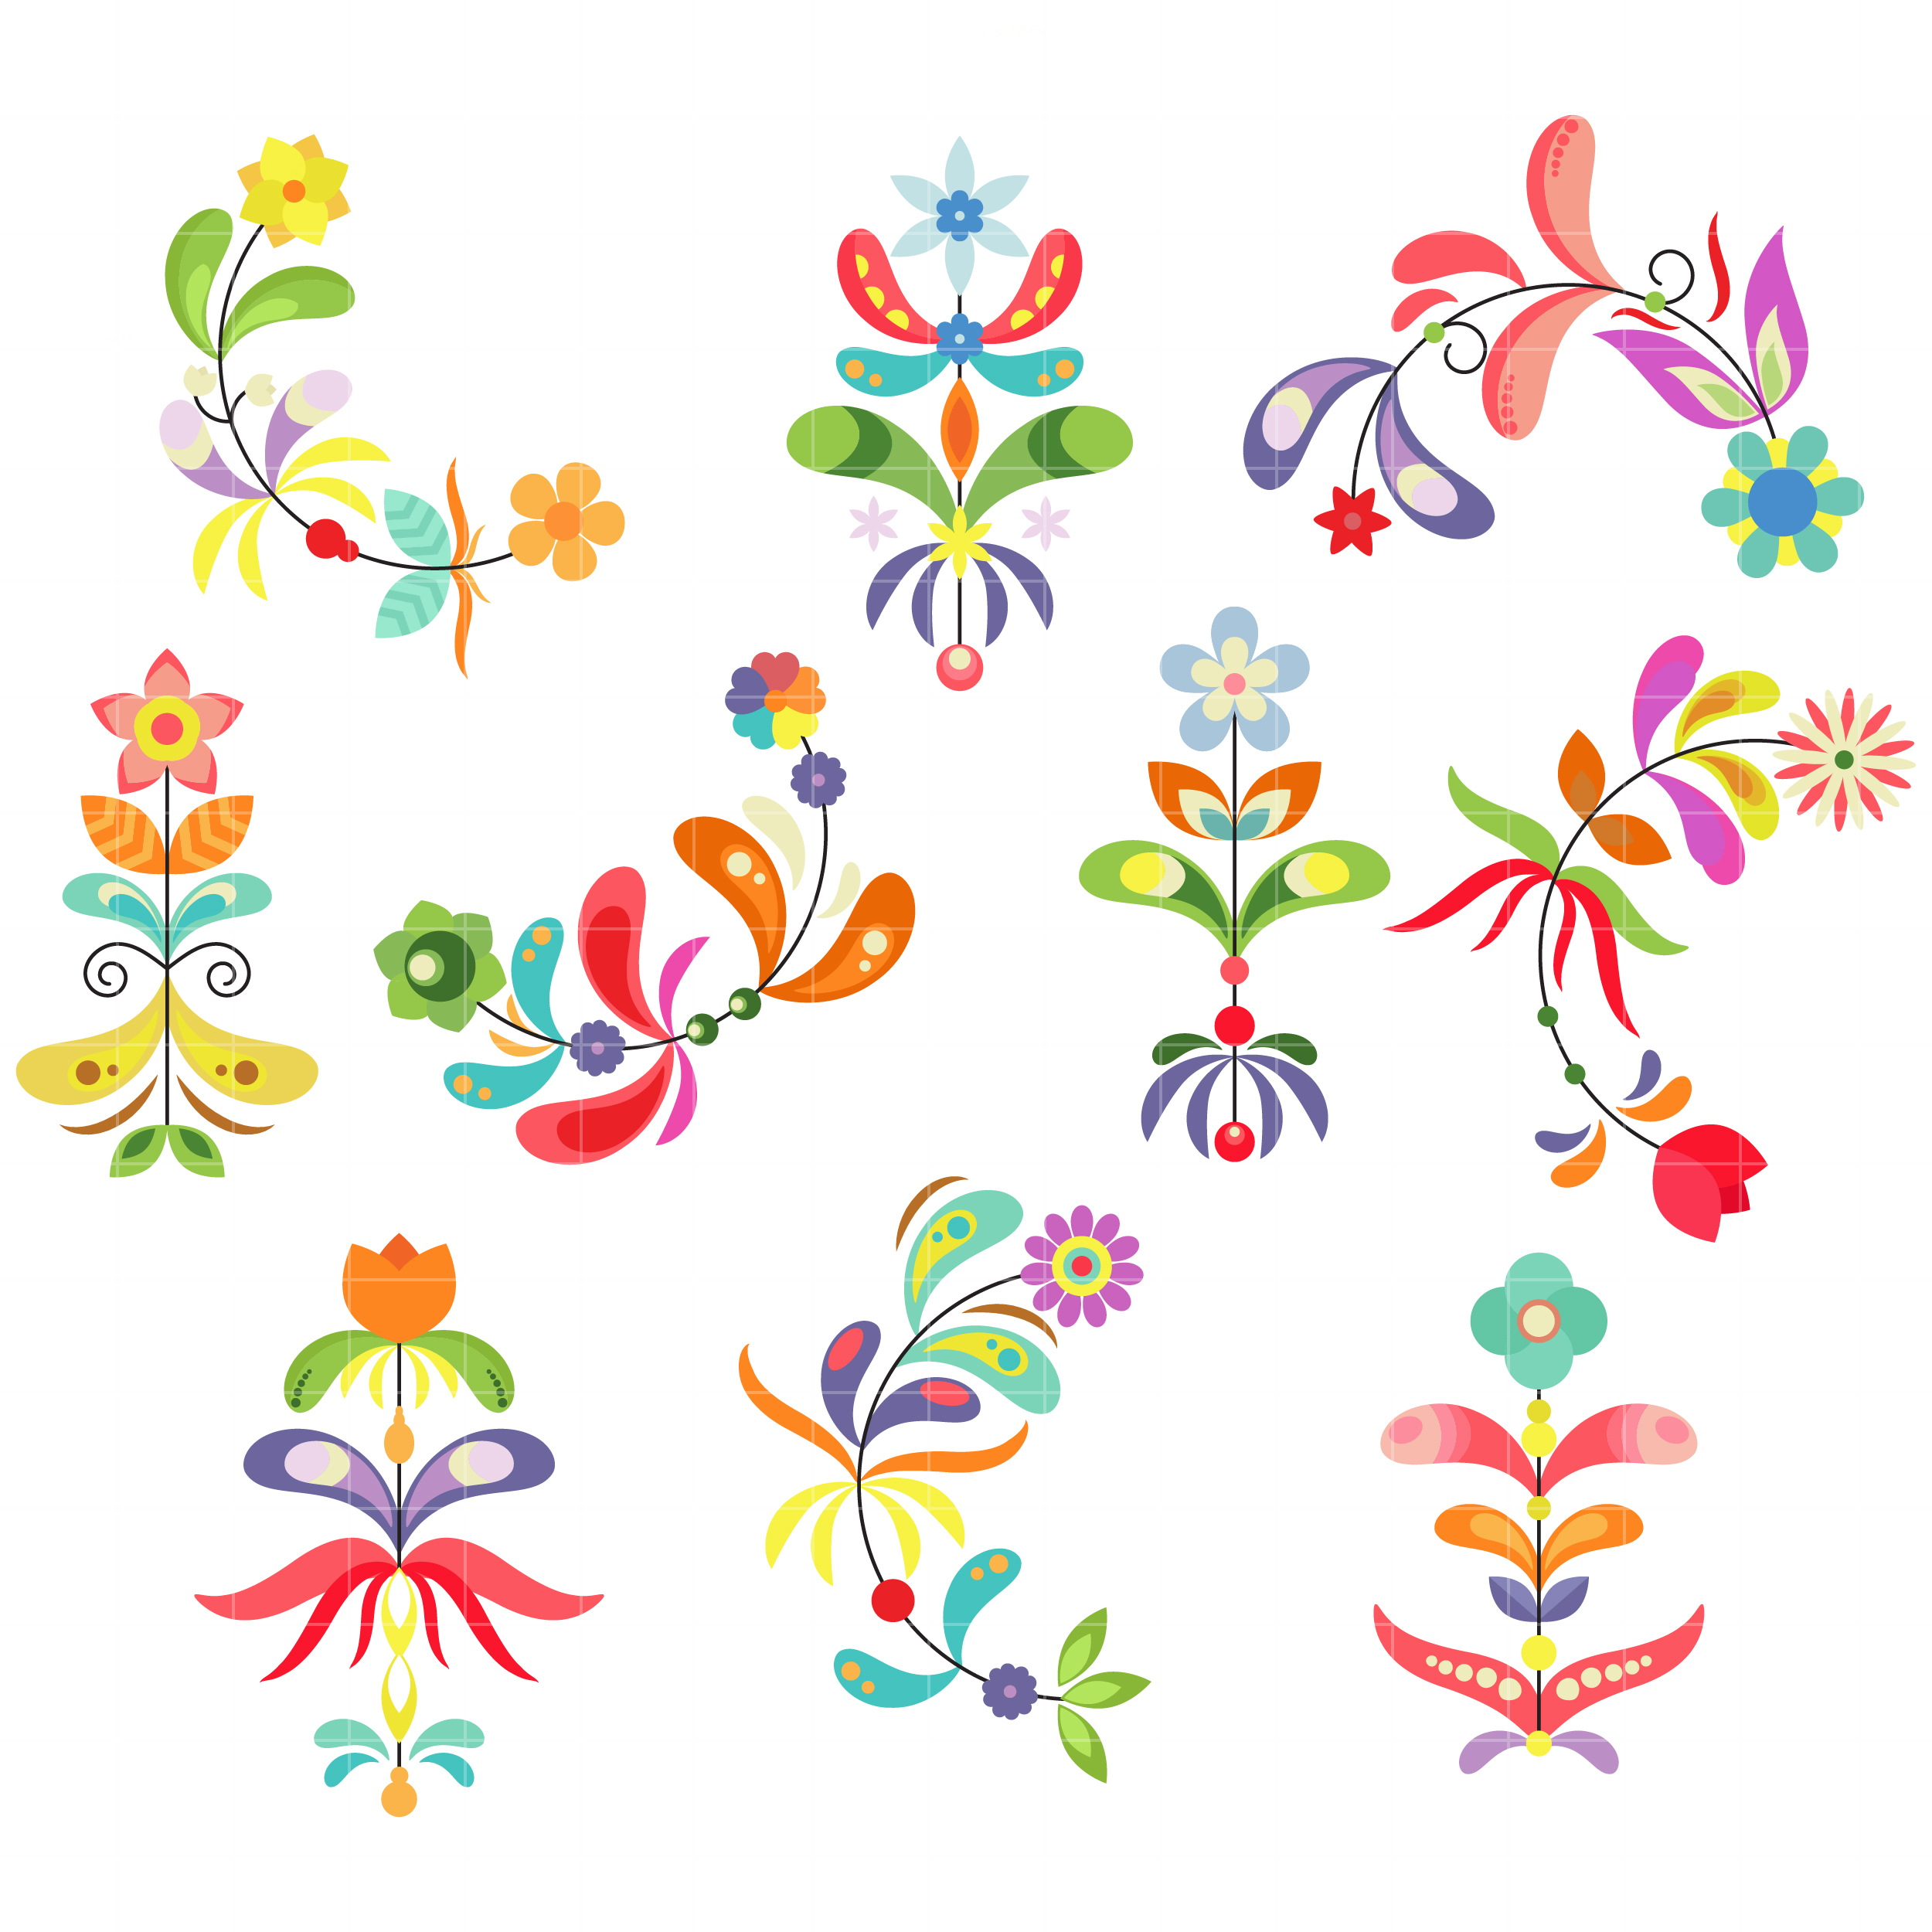 embroidery clipart sites - photo #2